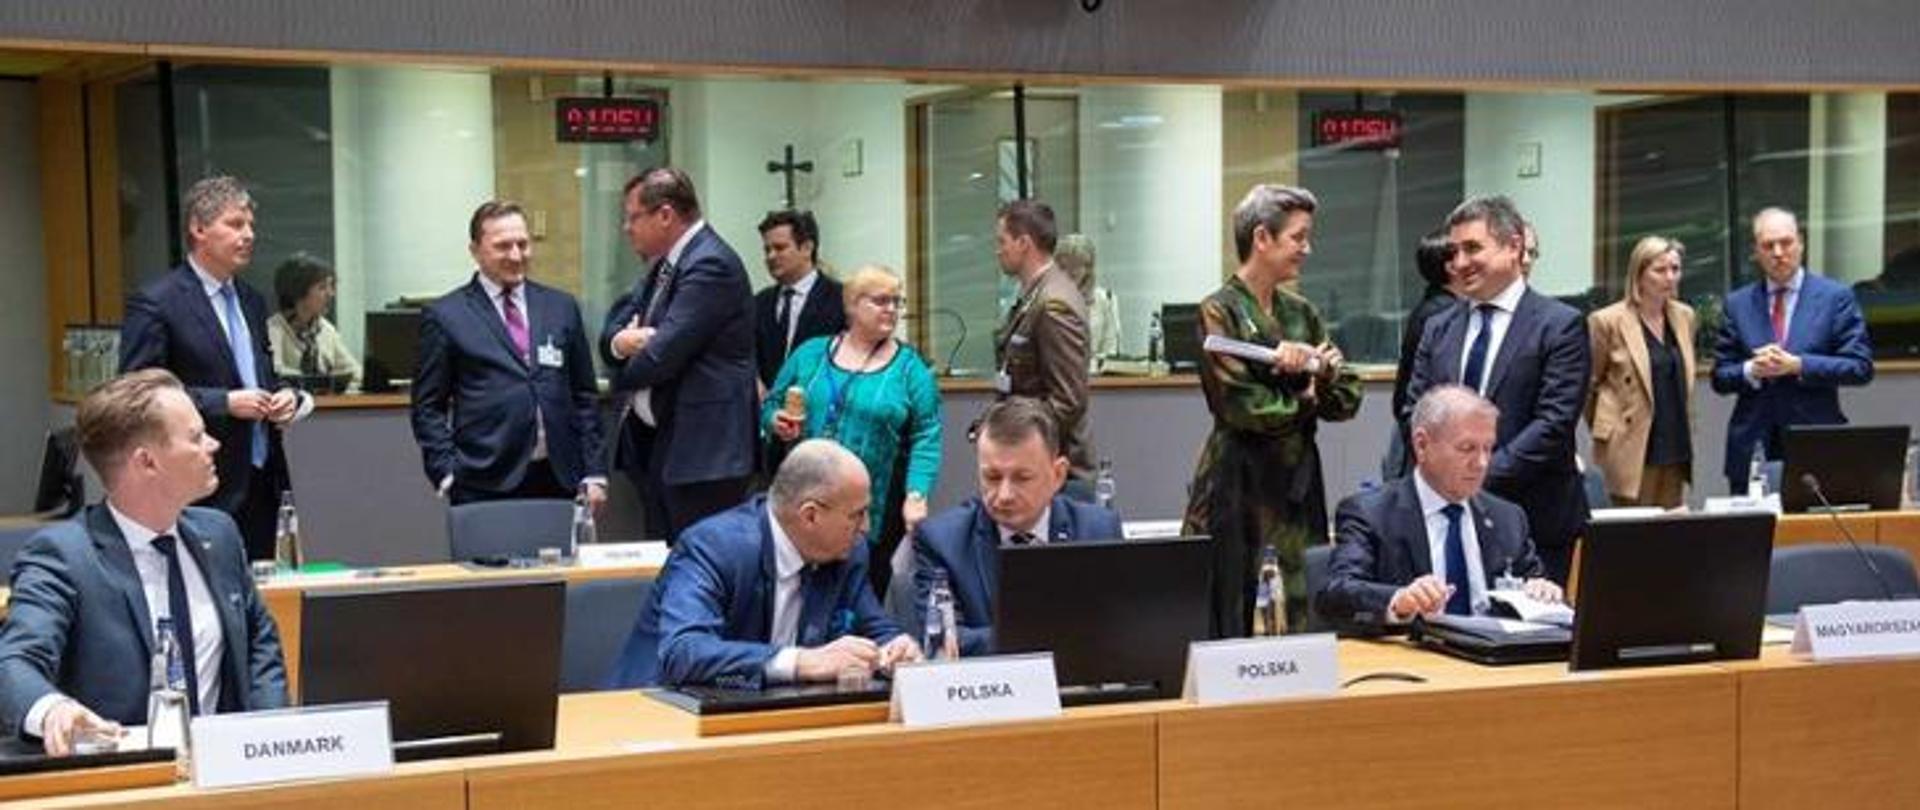 Meeting of the defense ministers of the European Union countries_zajawka